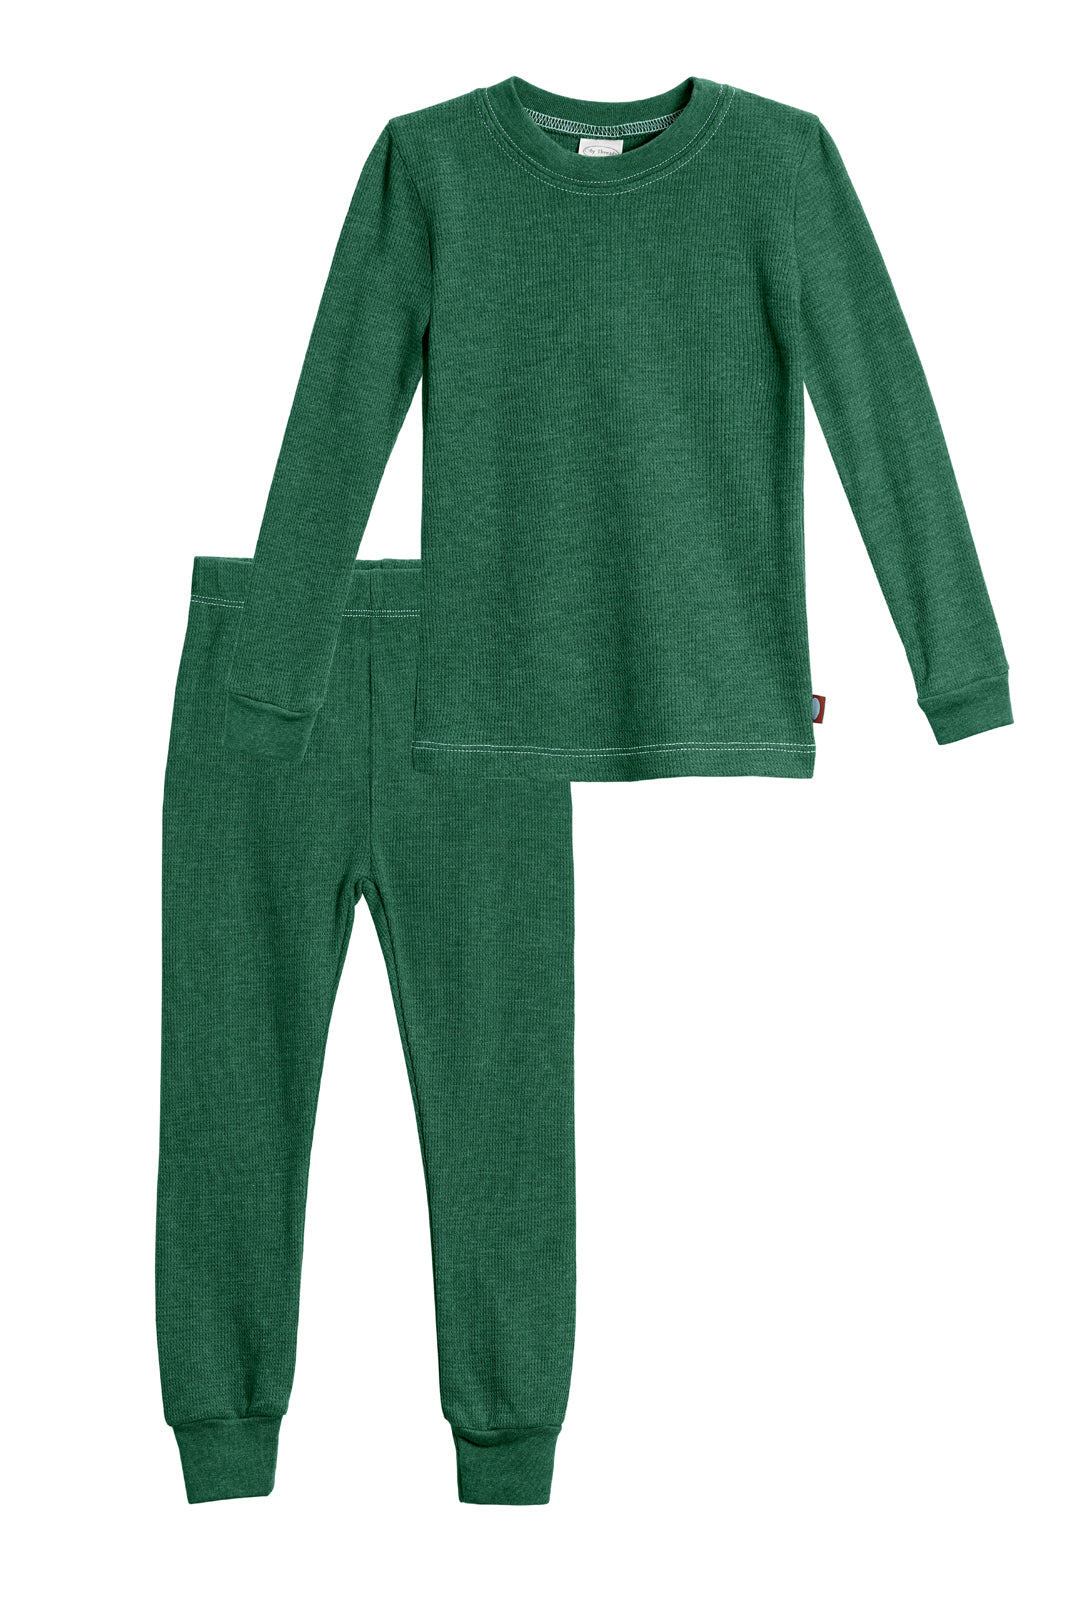 Long Johns for Toddlers and Infants, Baby Long Underwear